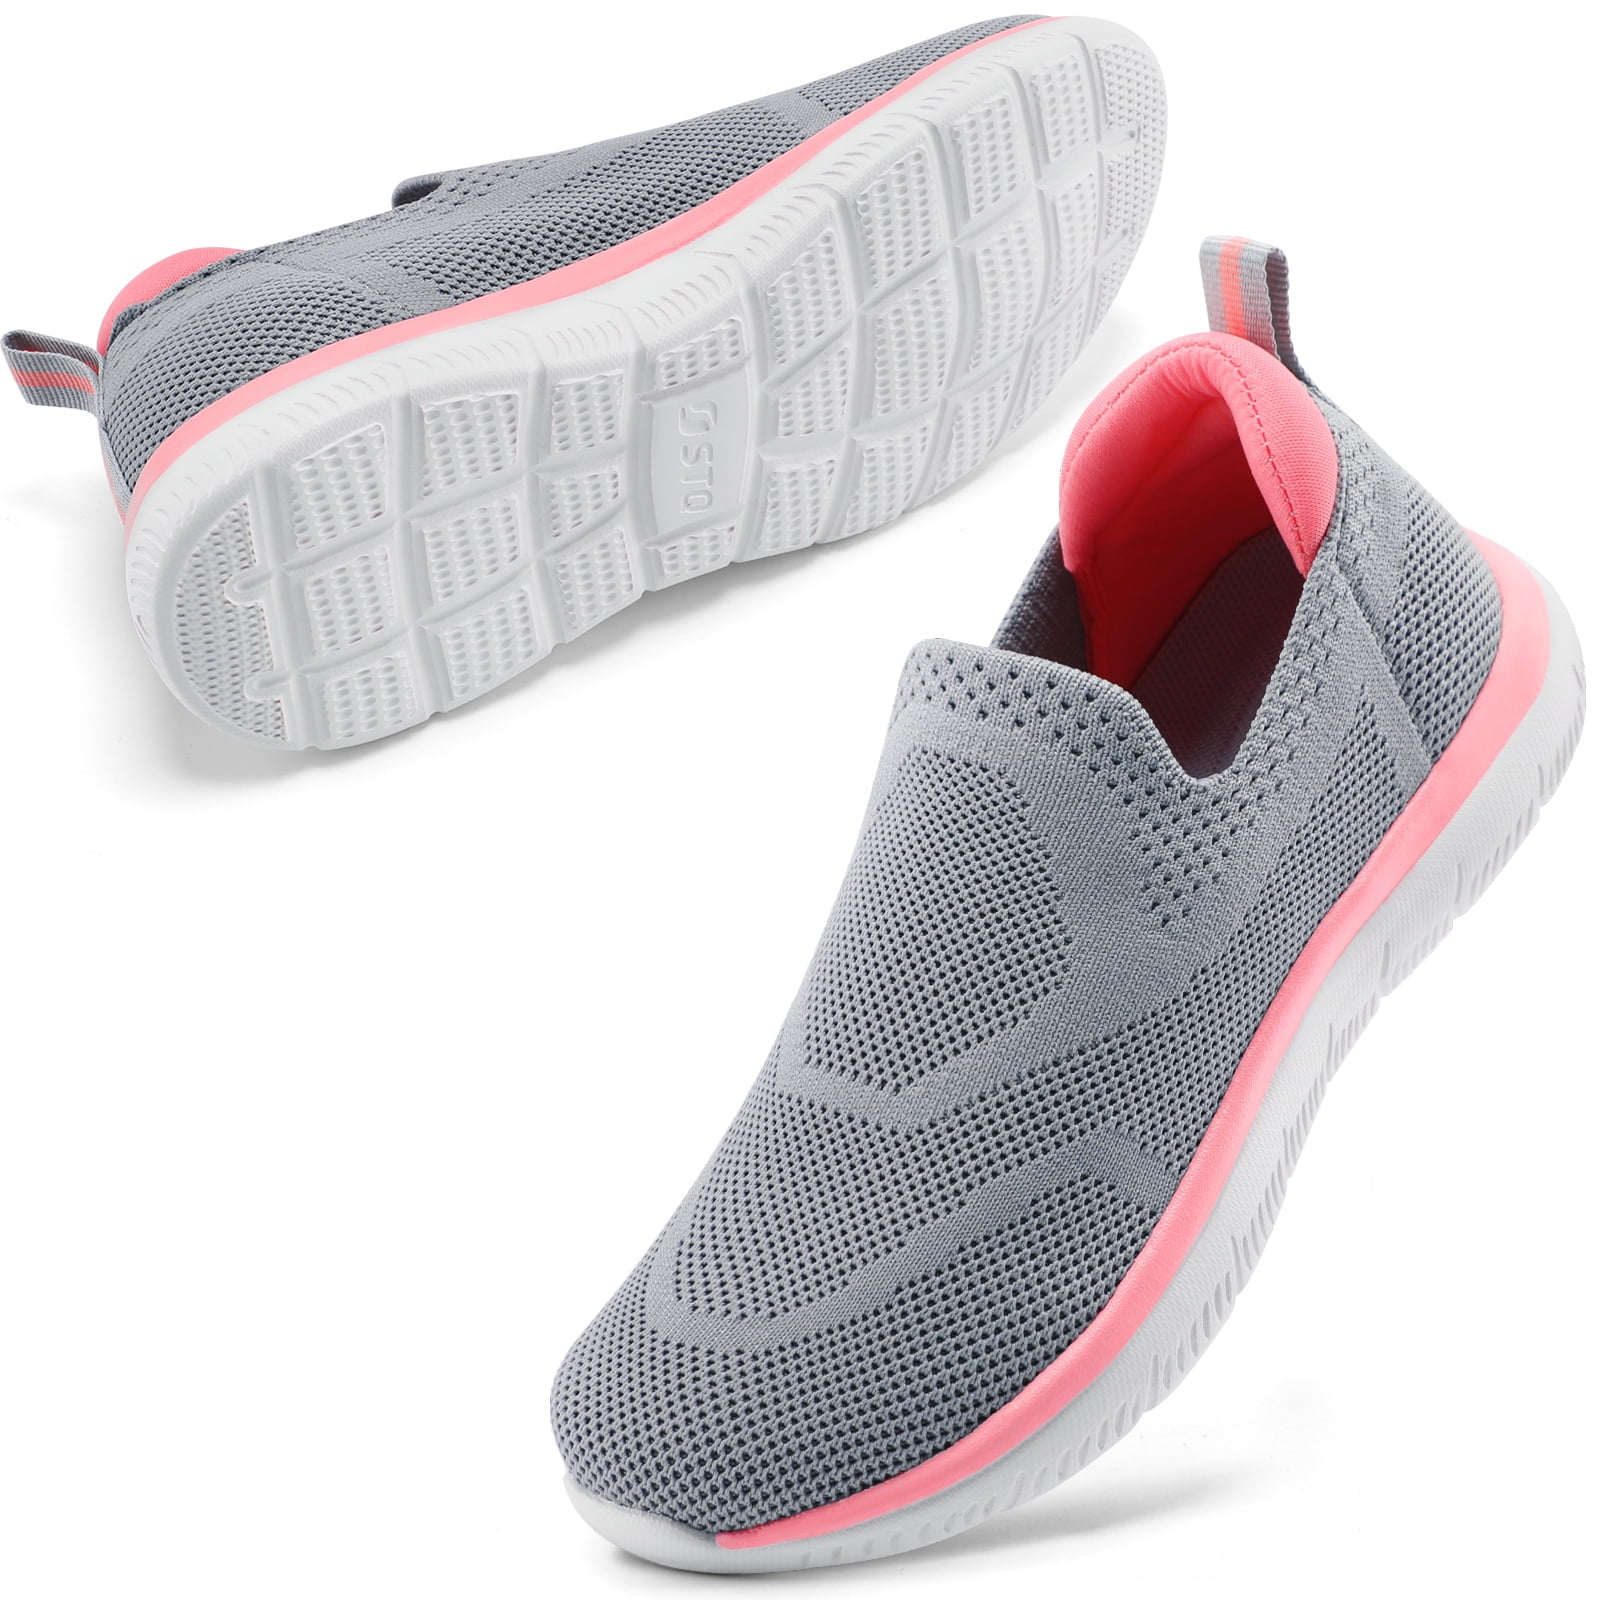 STQ Slip on Shoes for Women Breathable Walking Sneakers Light Grey Pink ...